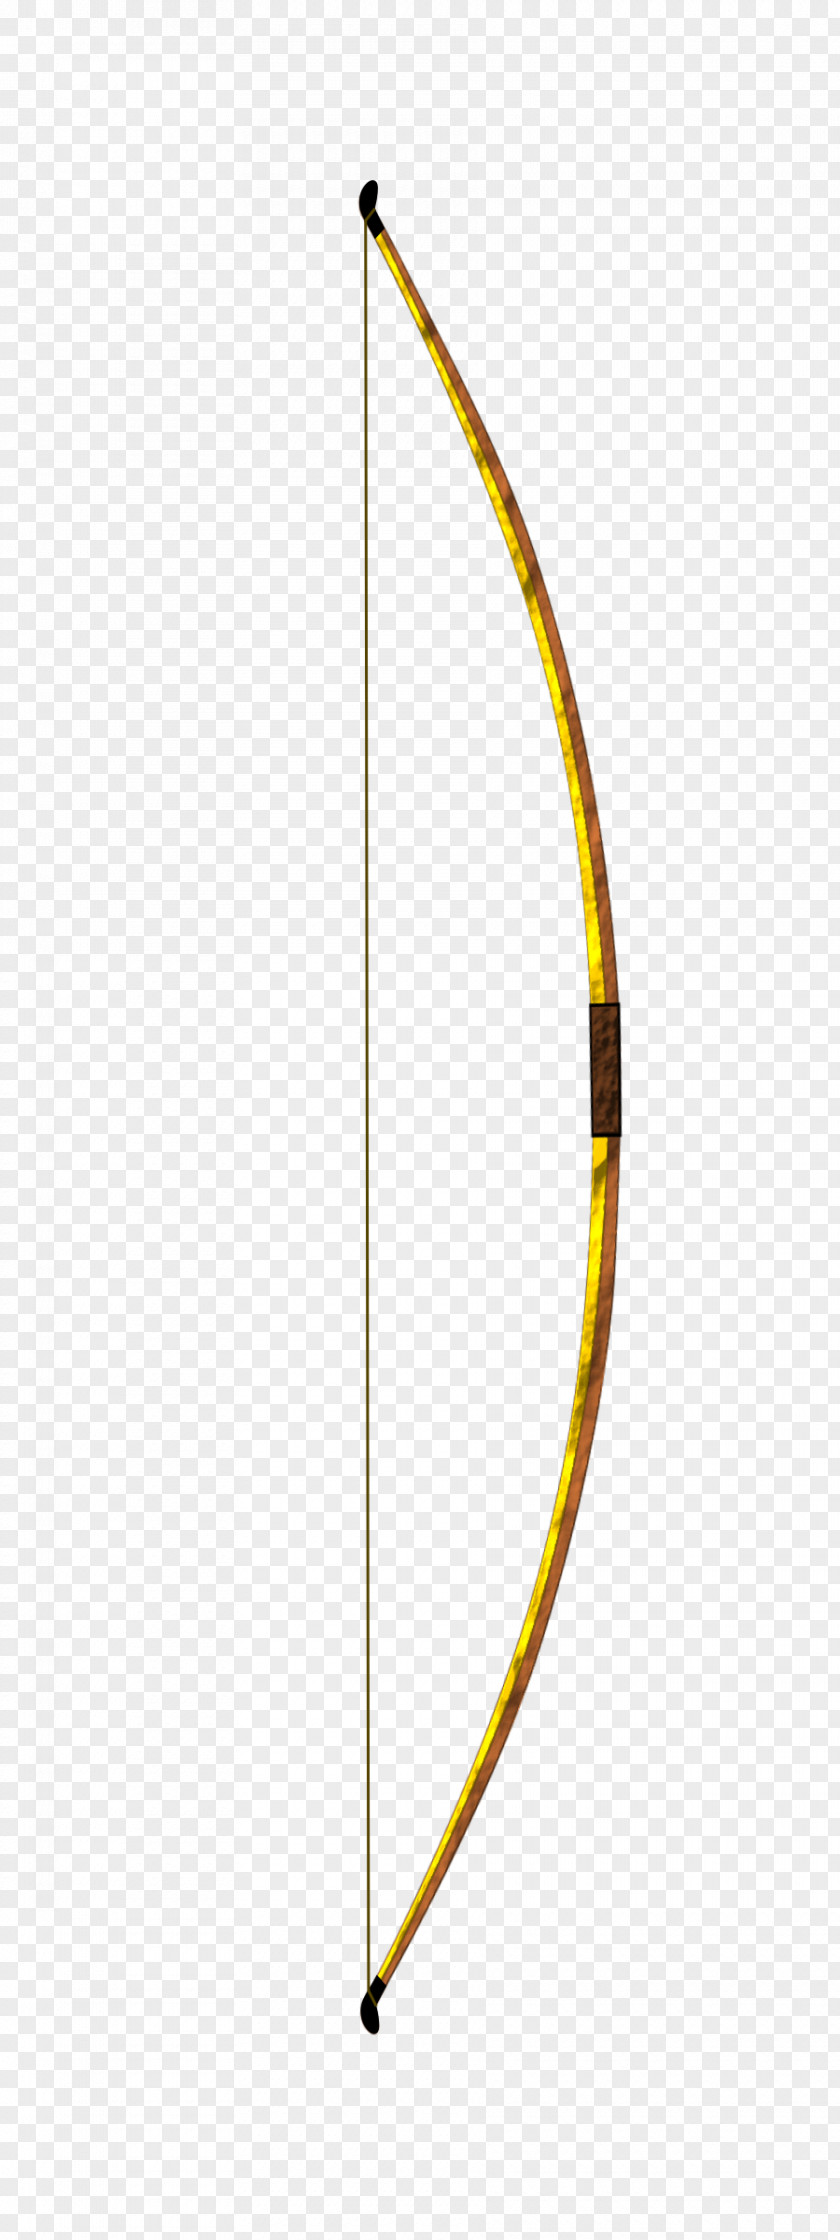 Bow And Arrow English Longbow Archery Clip Art PNG